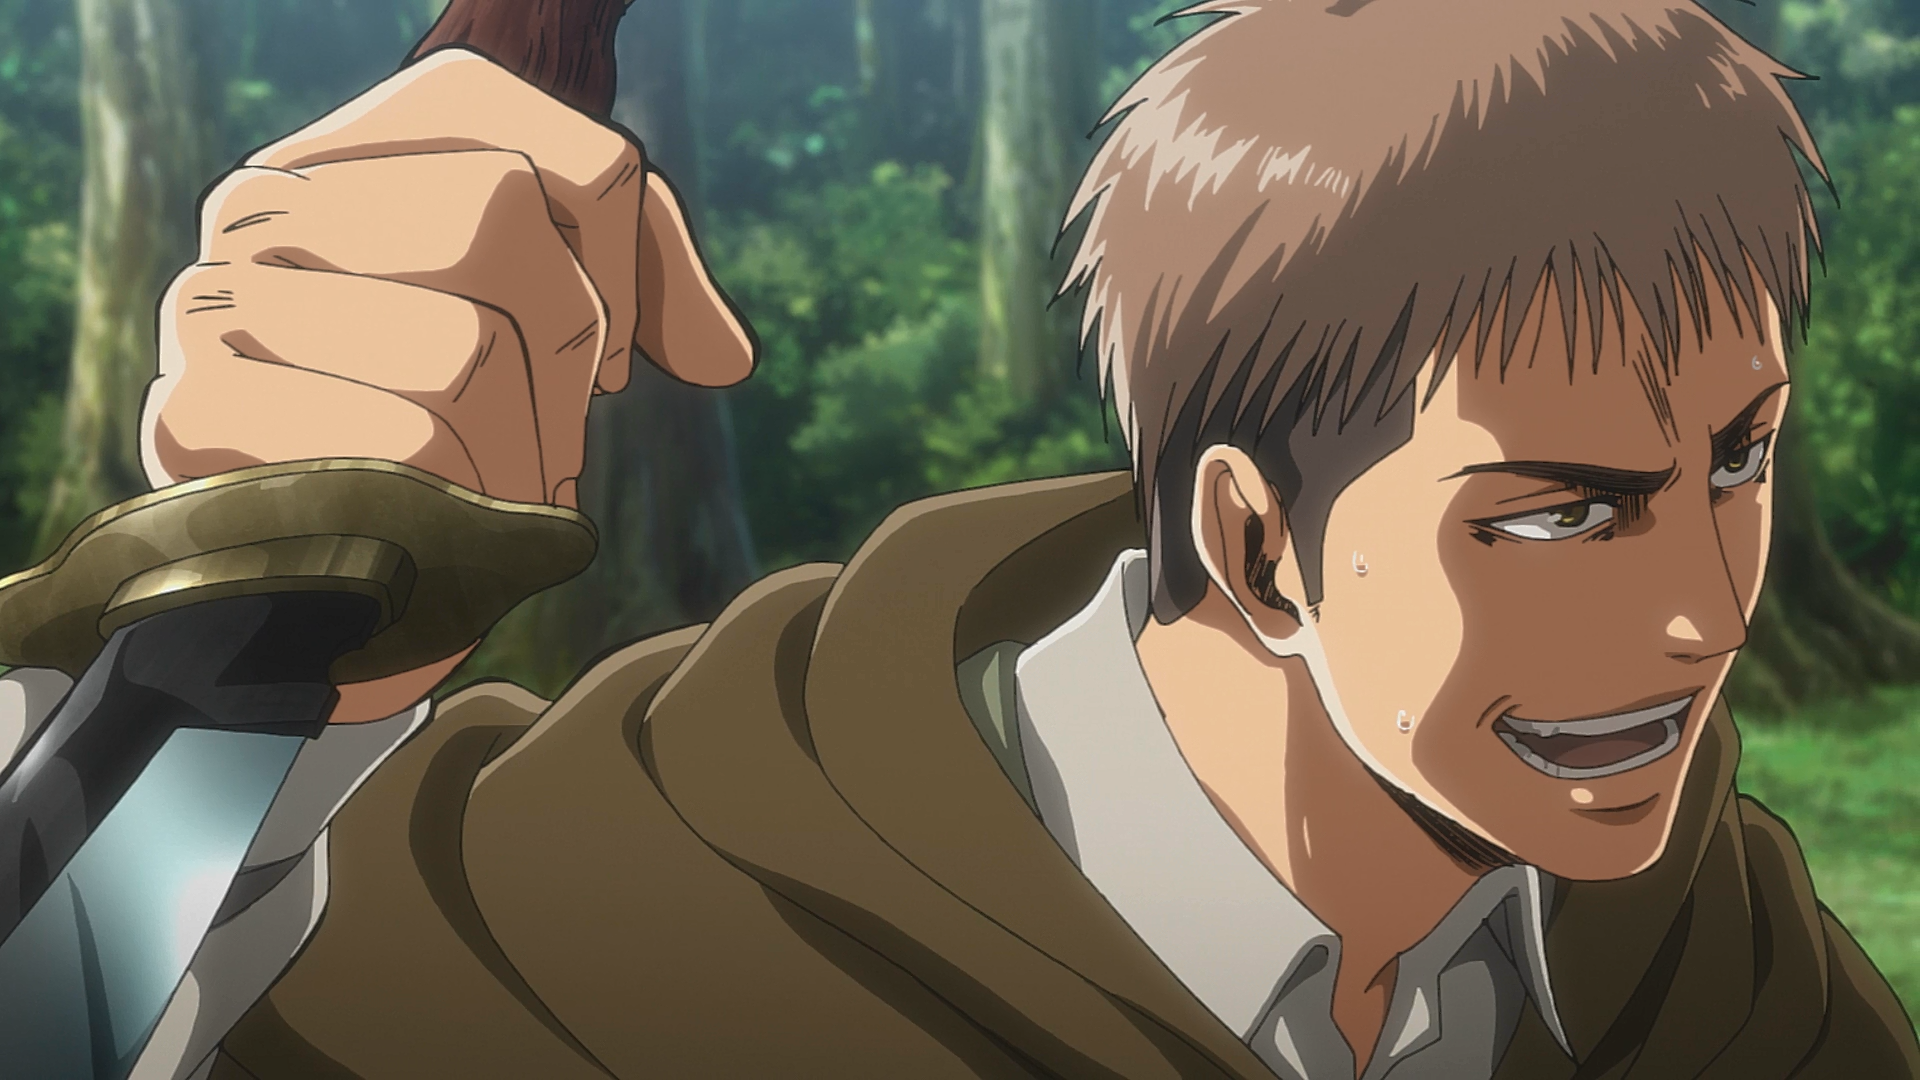 Do Jean and Mikasa Get Together at the End of Attack on Titan?